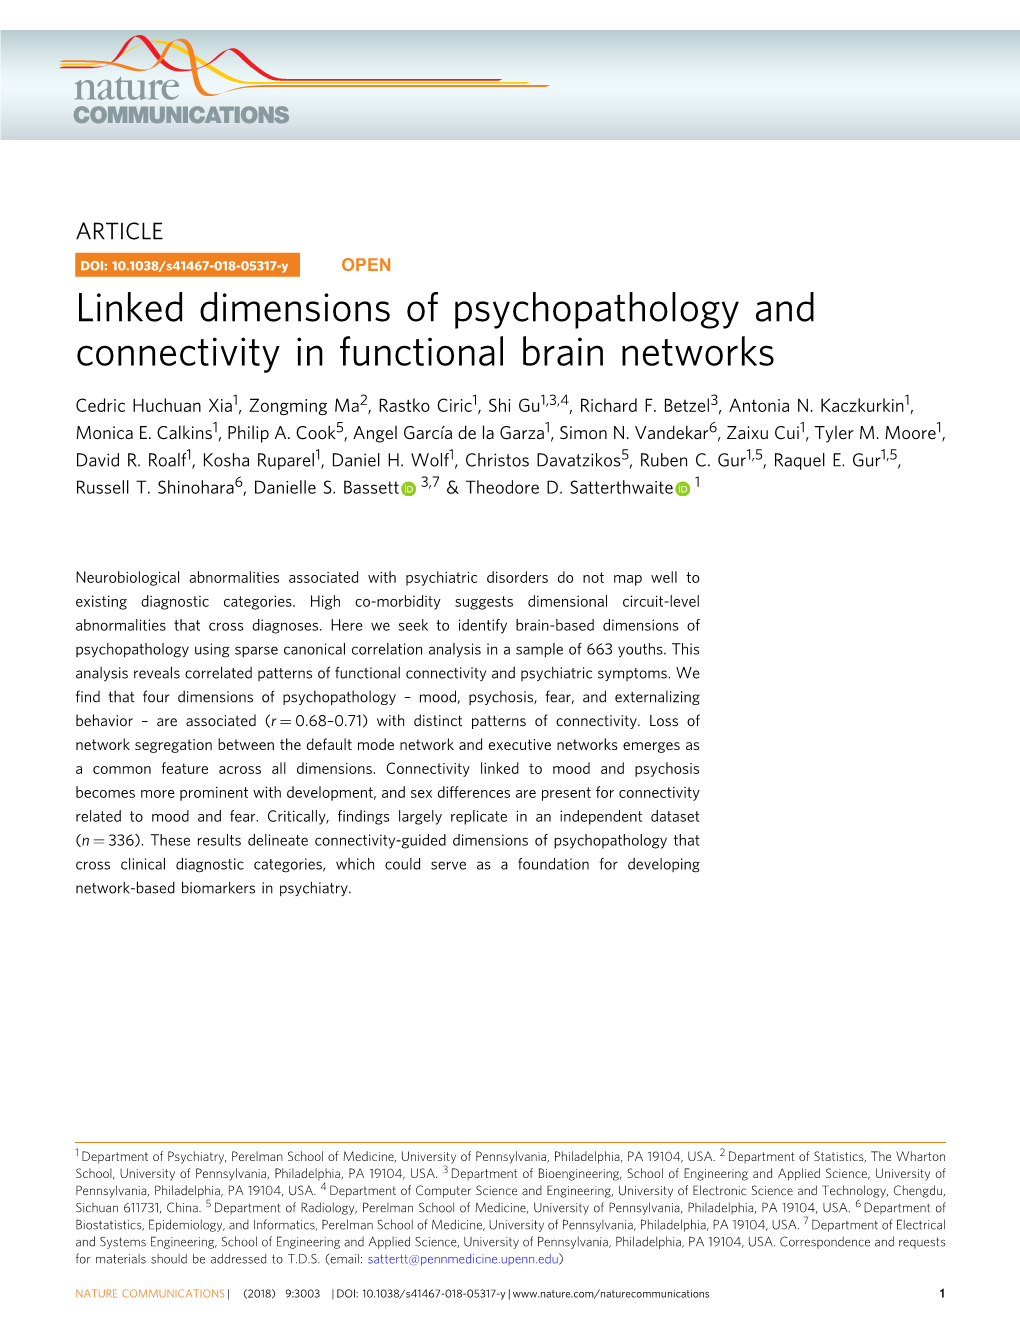 Linked Dimensions of Psychopathology and Connectivity in Functional Brain Networks